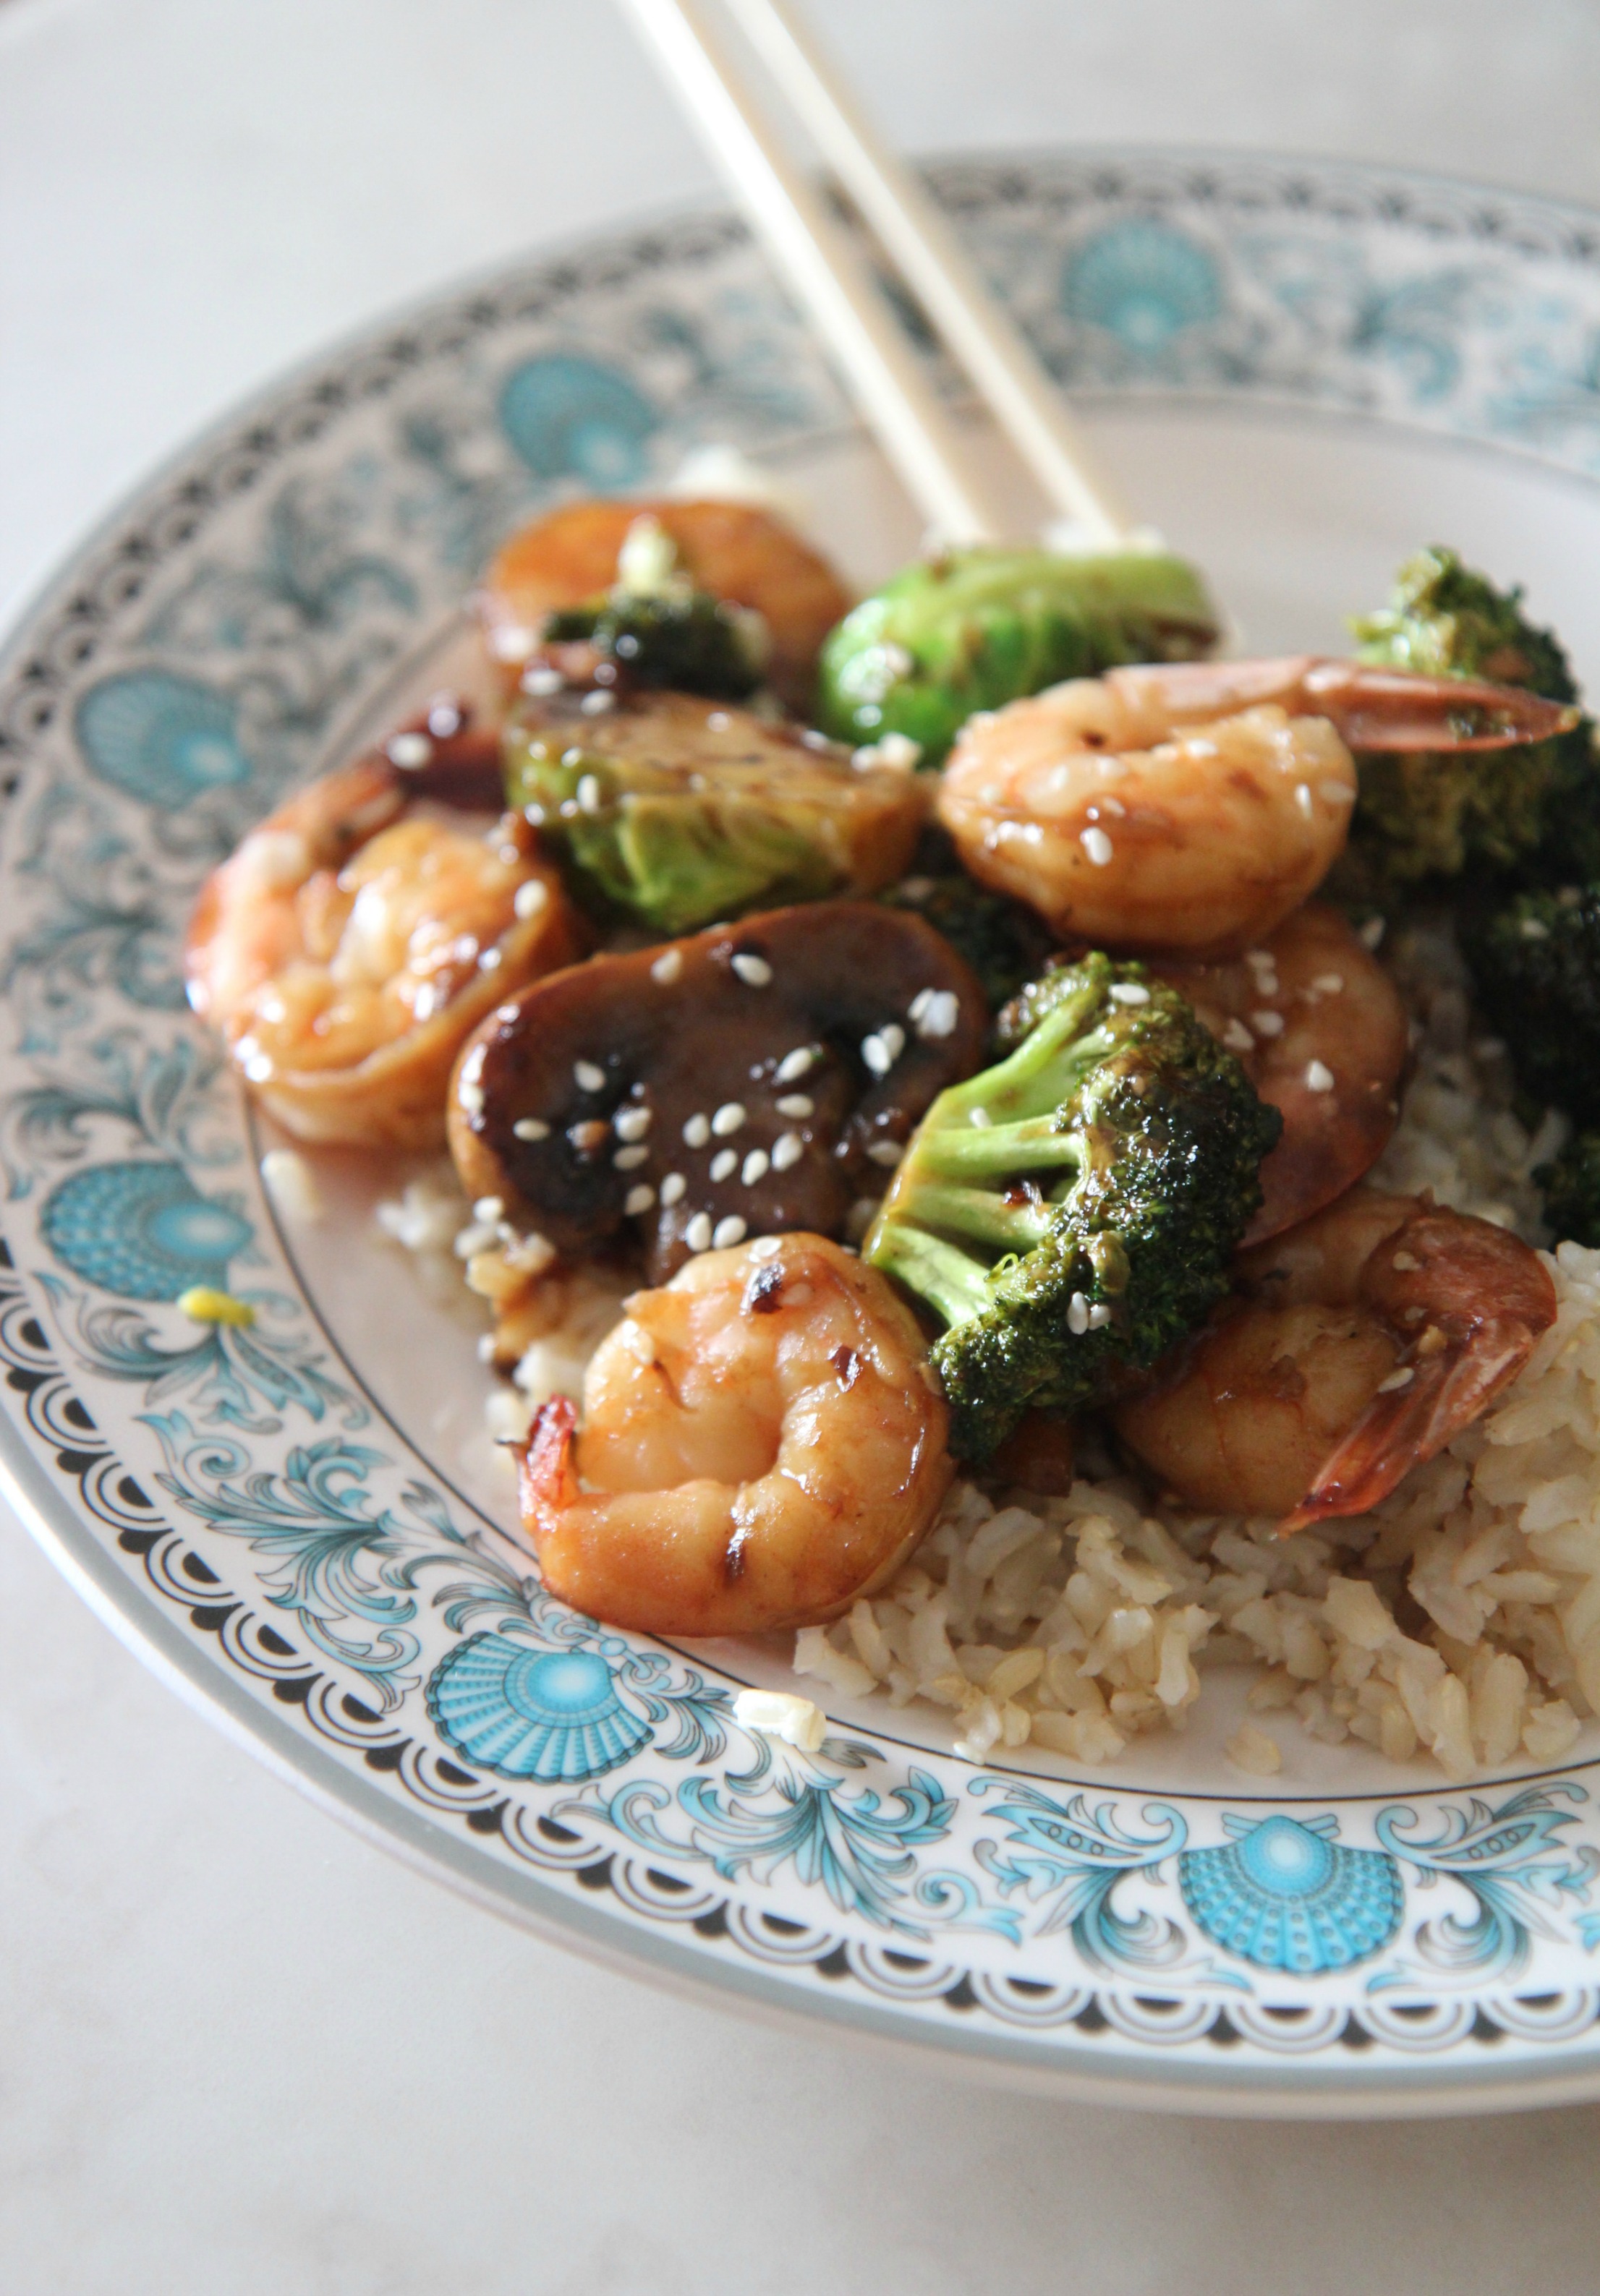 Shrimp, mushrooms, broccoli, and rice on a plate with chop sticks. 